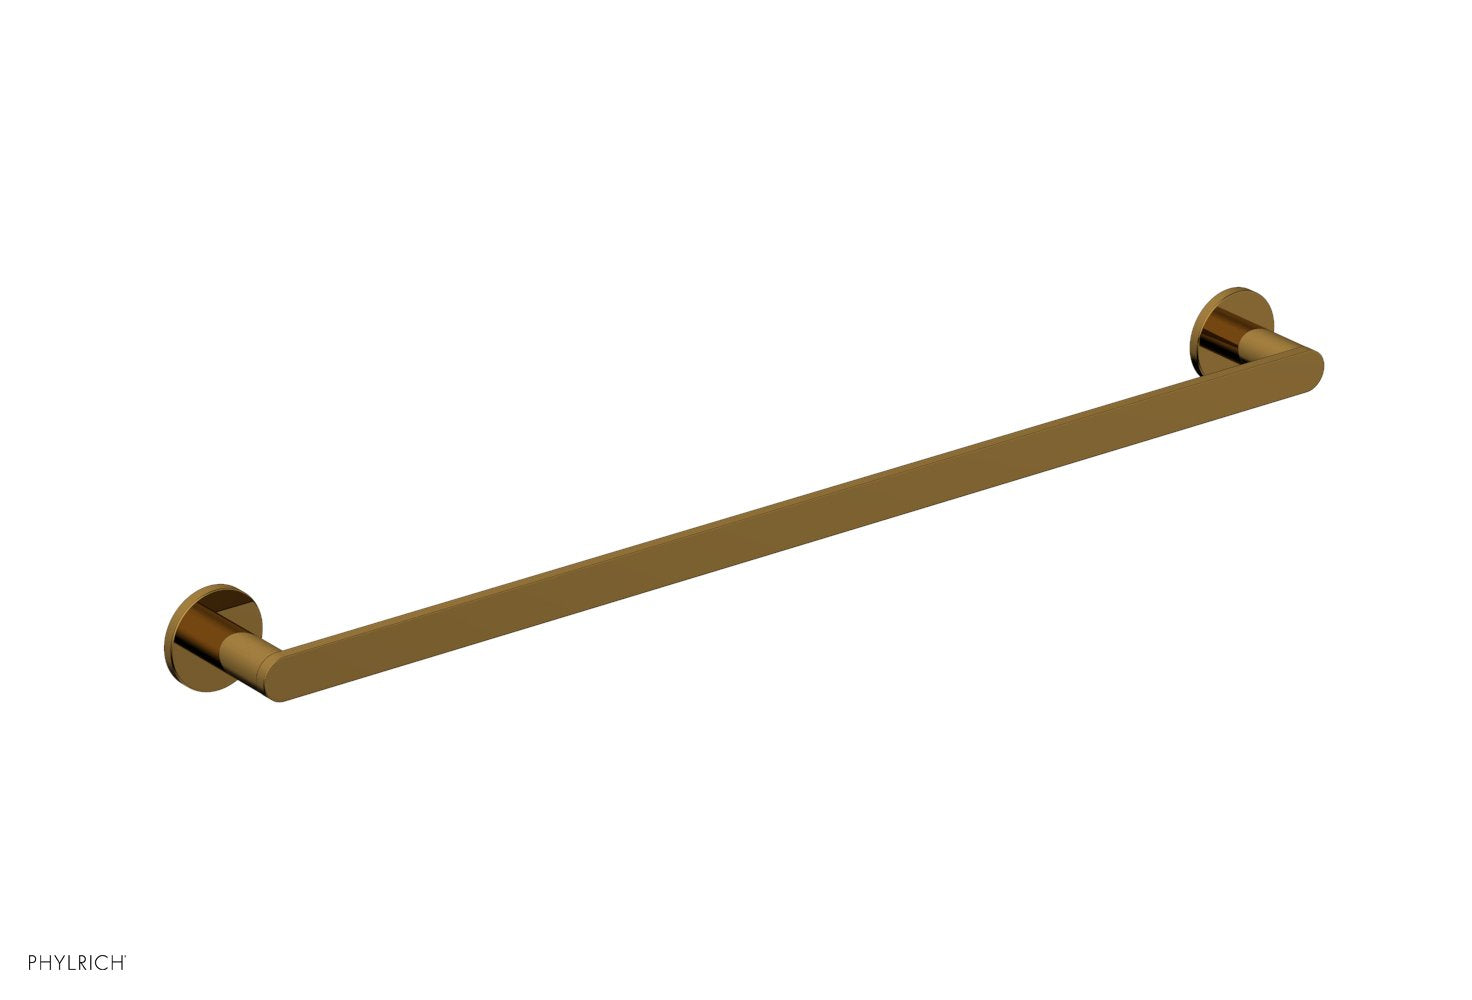 Phylrich ROND Contemporary 24" Towel Bar